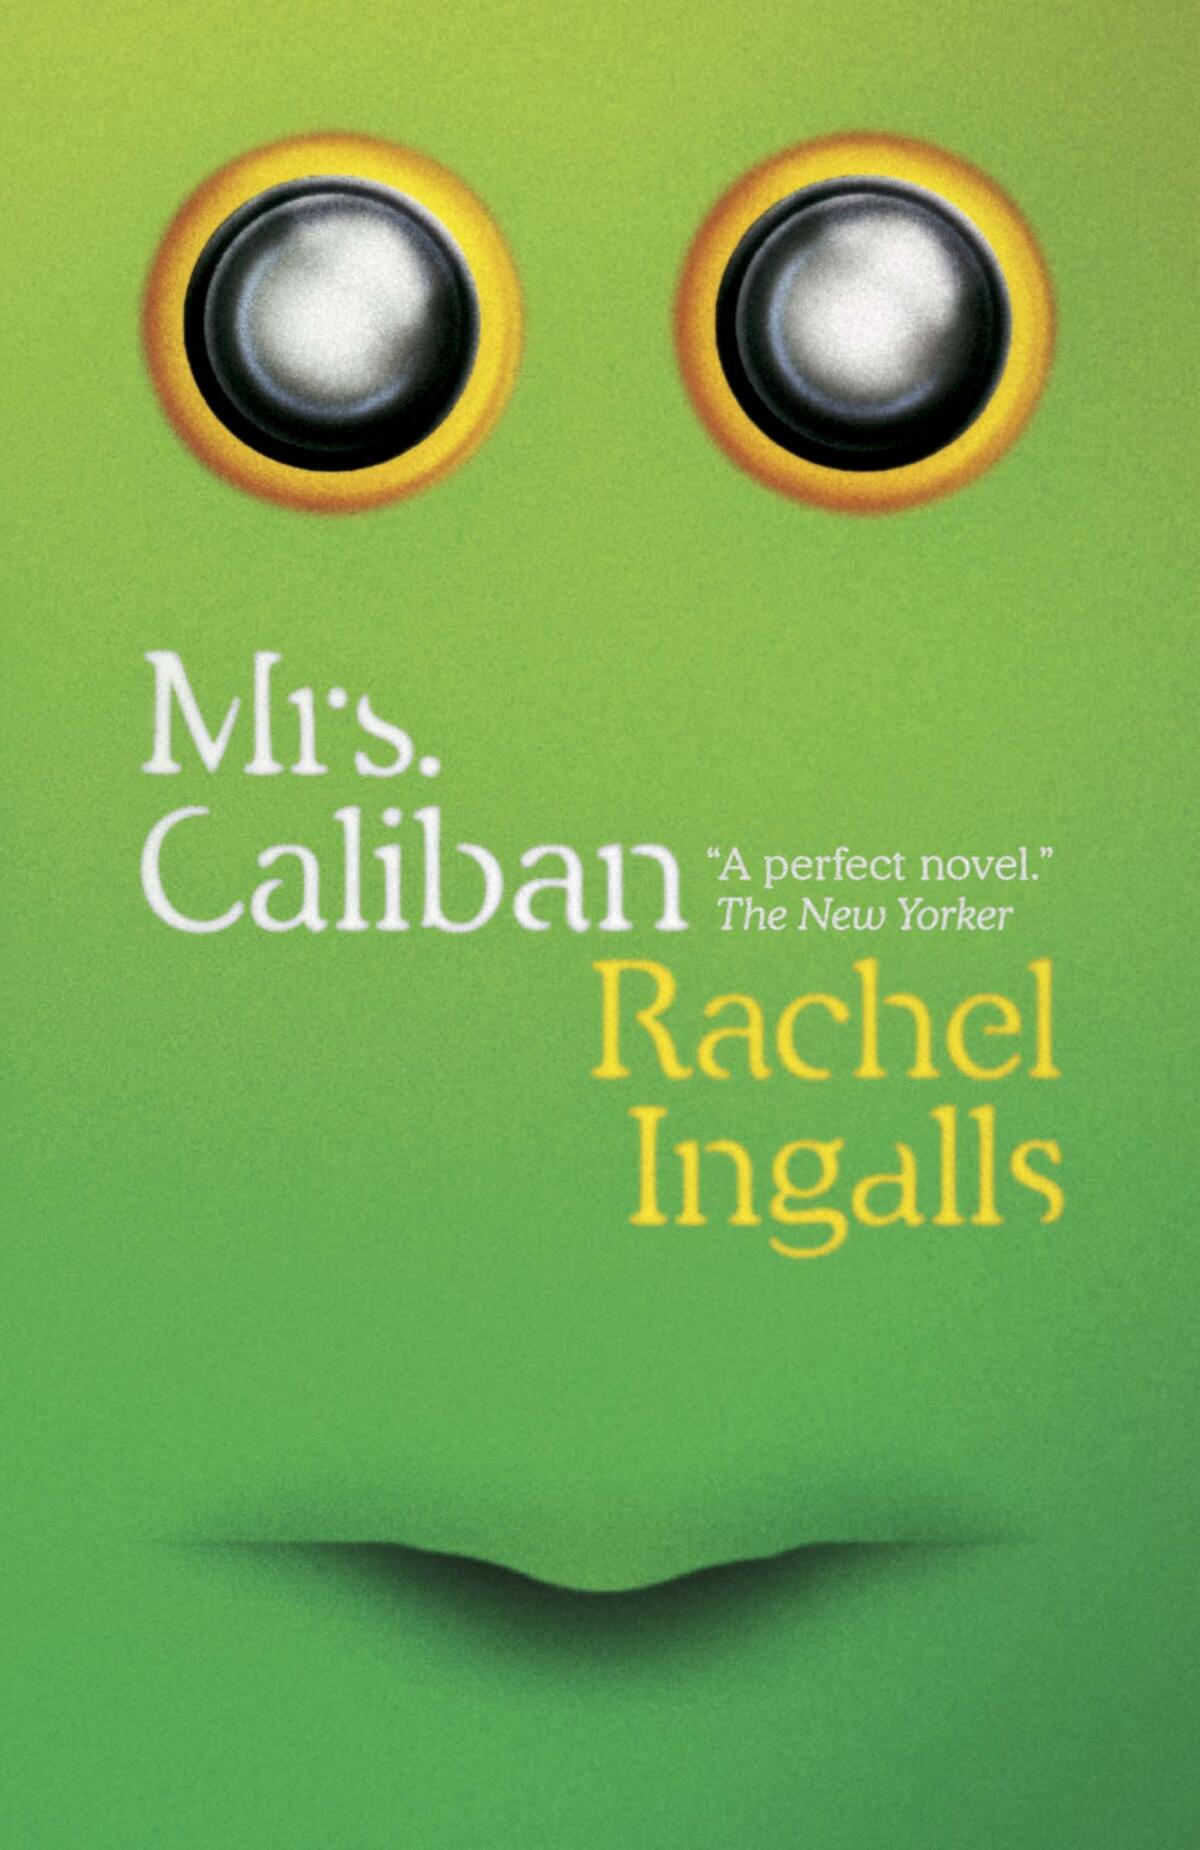 The cover of the book "Mrs. Caliban," by Rachel Ingalls, is green and looks a bit like a face with round eyes.